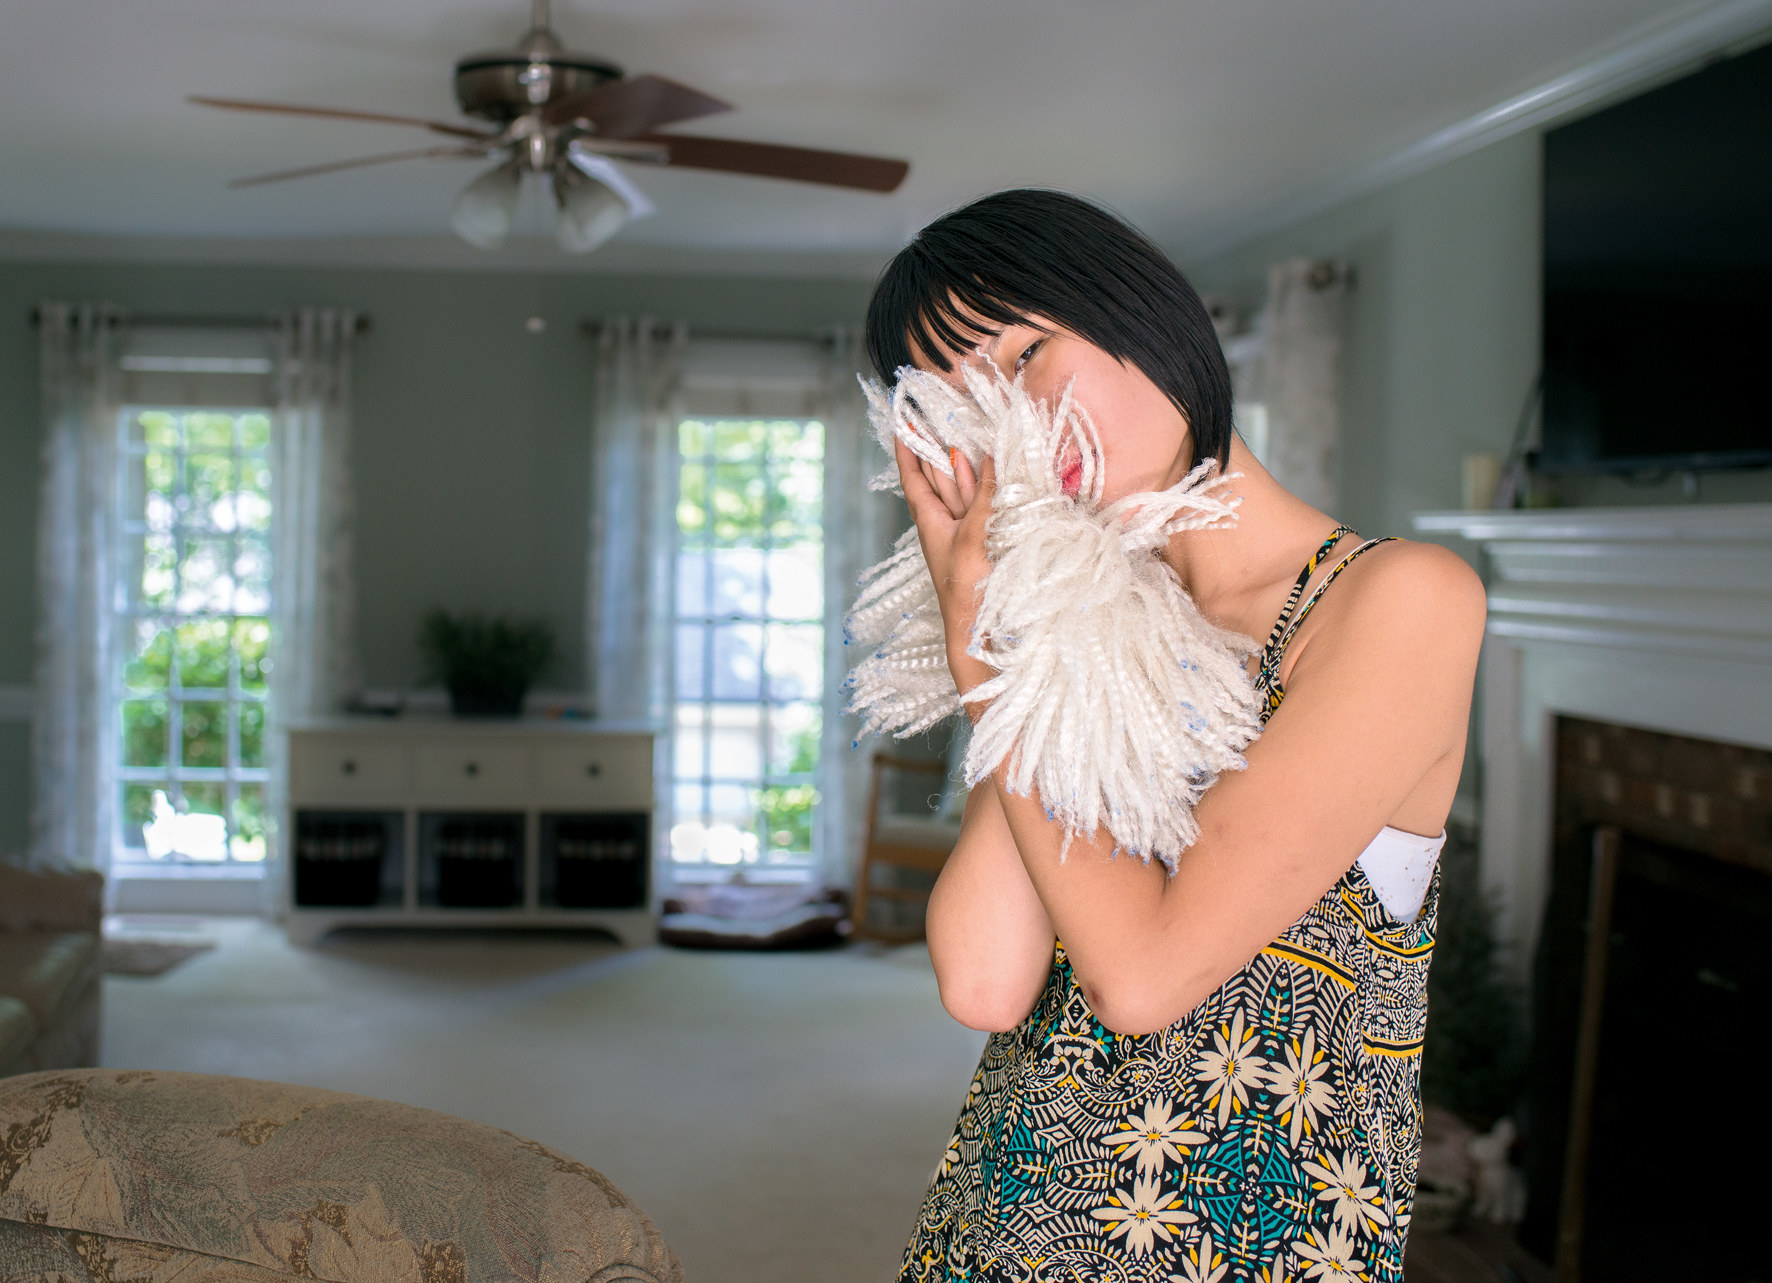 Mia, a young autistic person, stands in a room and presses her face into a soft, billowy mound of fabric